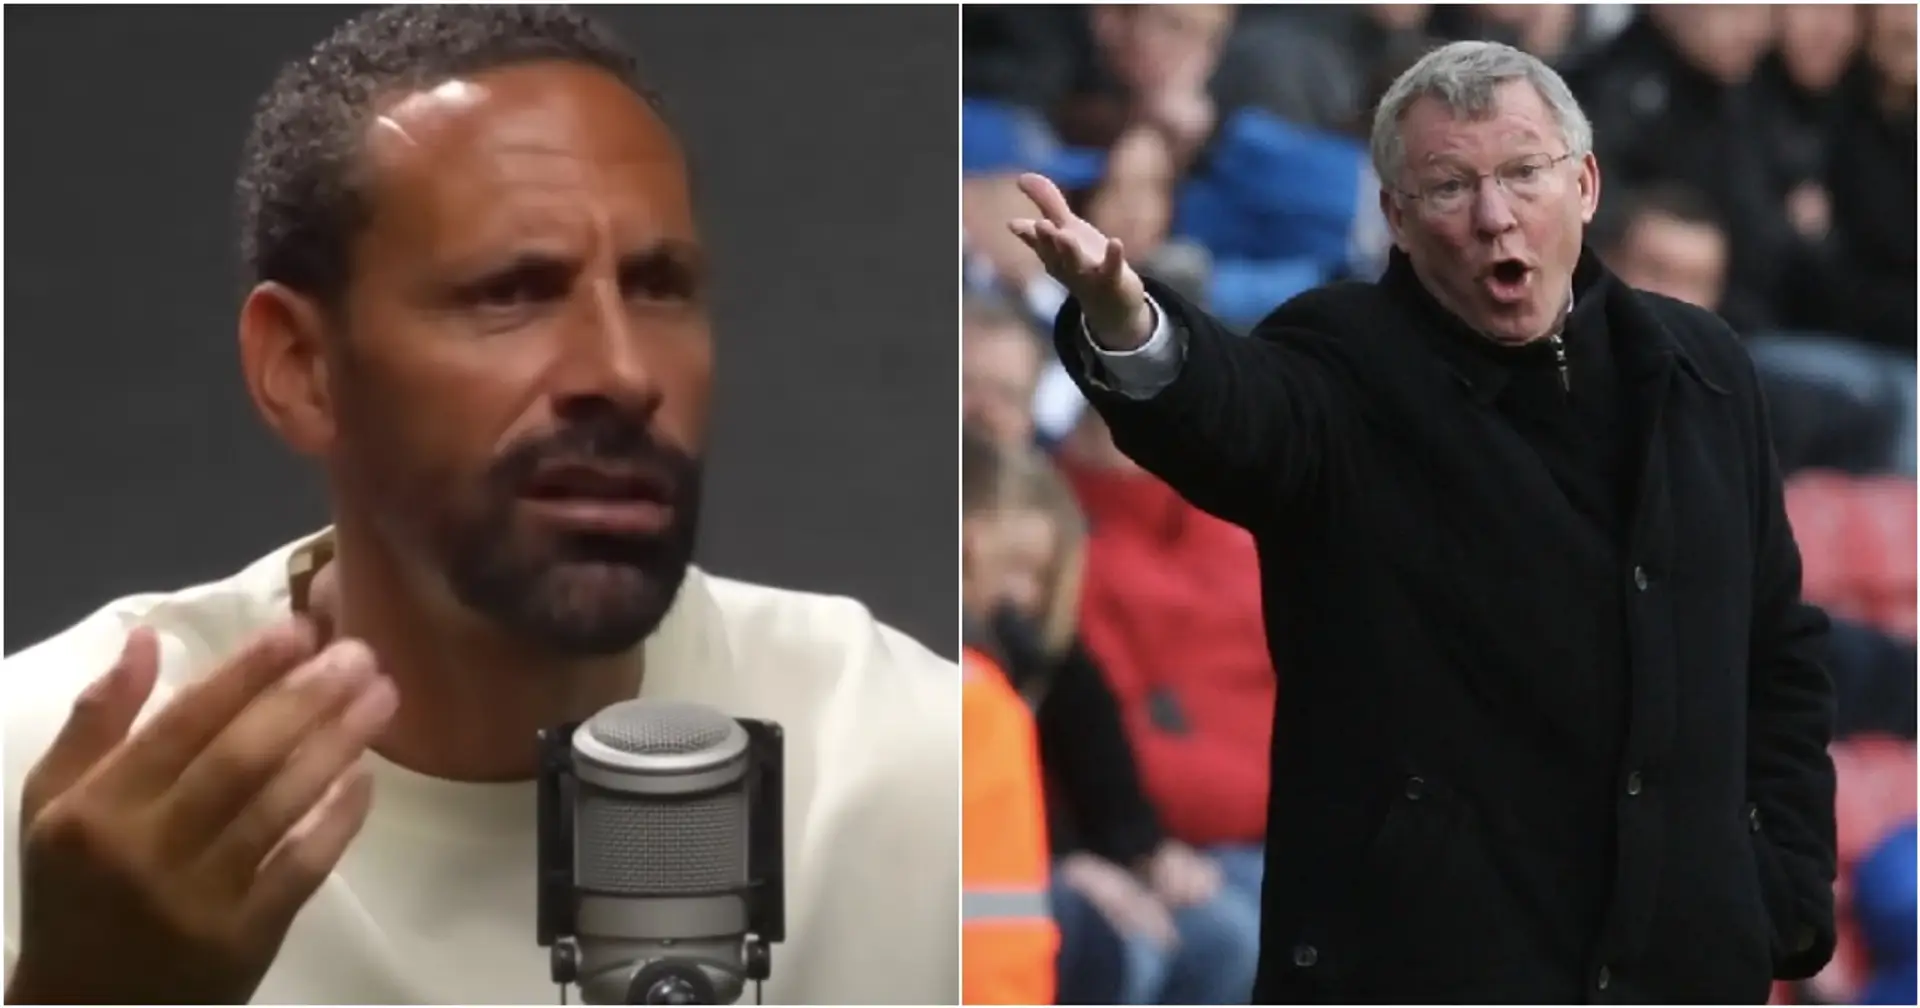 'I came to apologise, he went nuts': Rio Ferdinand reveals calling out Sir Alex once - he regretted it soon